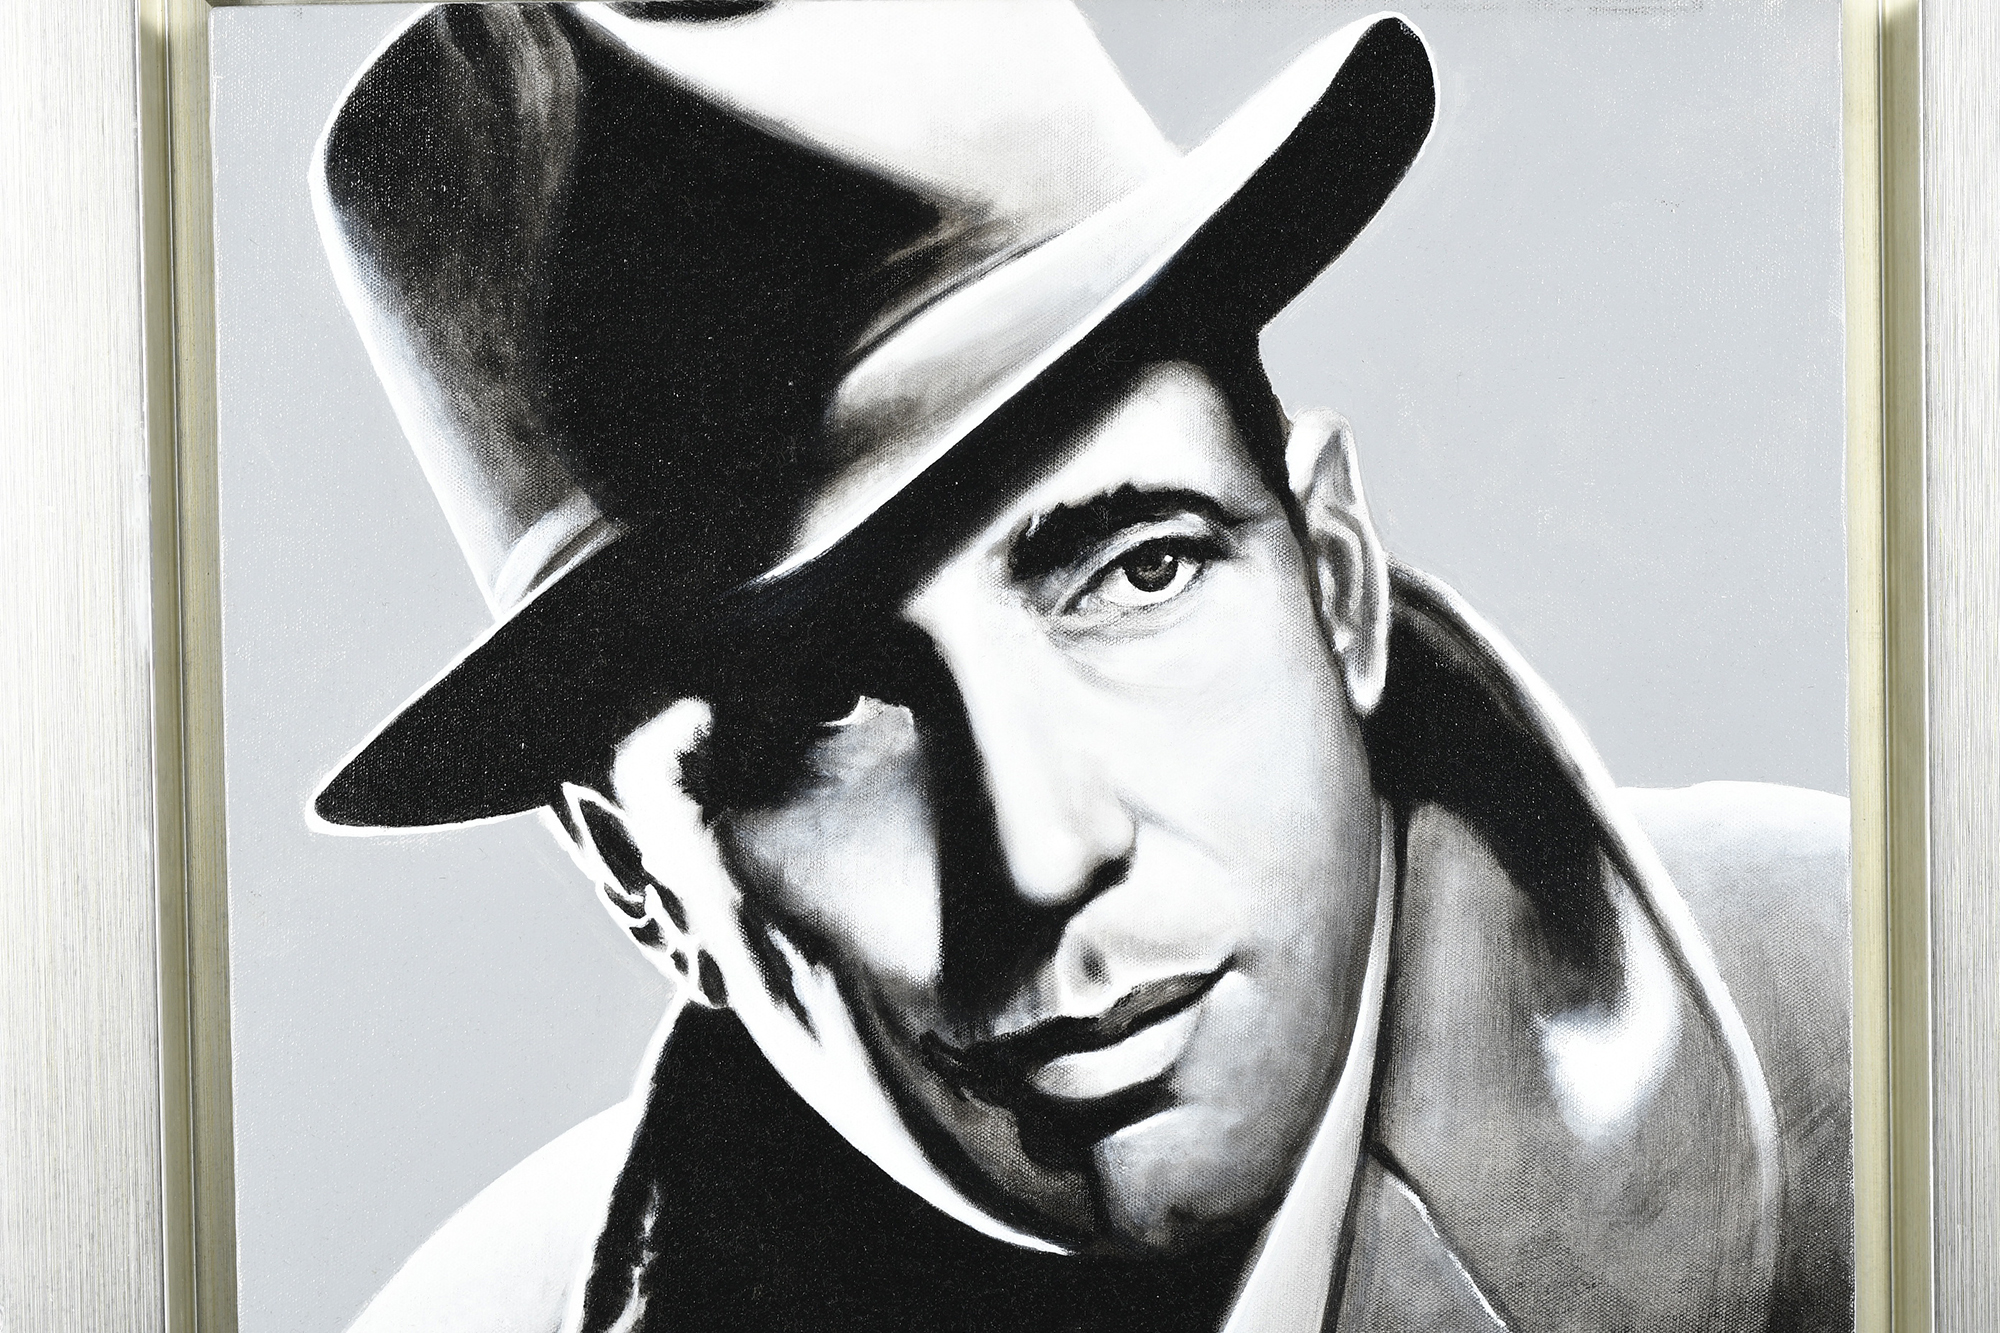 Original Oil Painting by Terence Vickress - Humphrey Bogart - Image 2 of 10